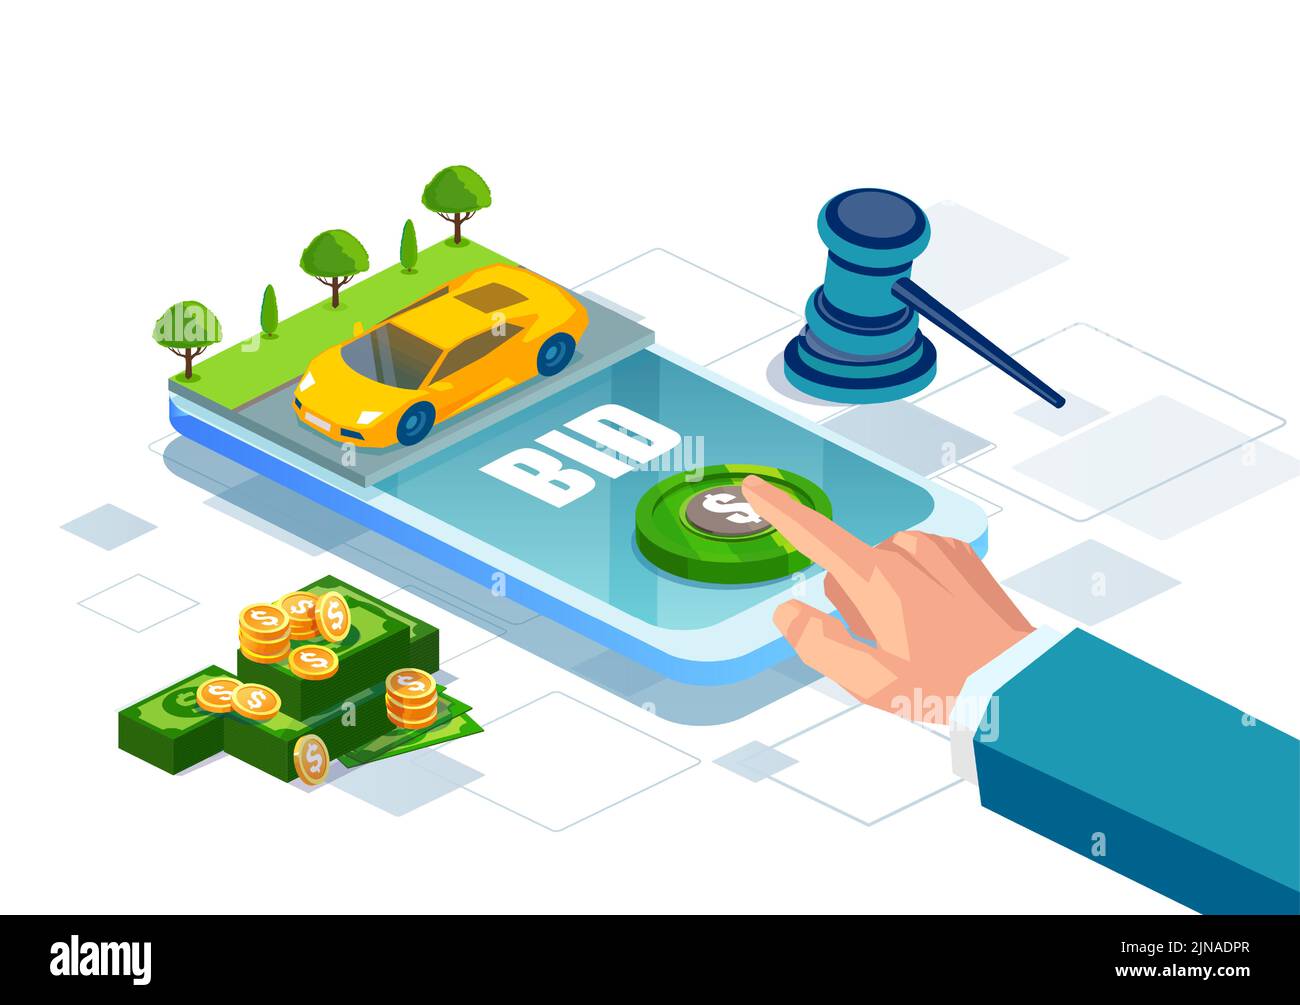 Online car auction via smartphone app with a bid button. Auction and mobile bidding concept Stock Vector